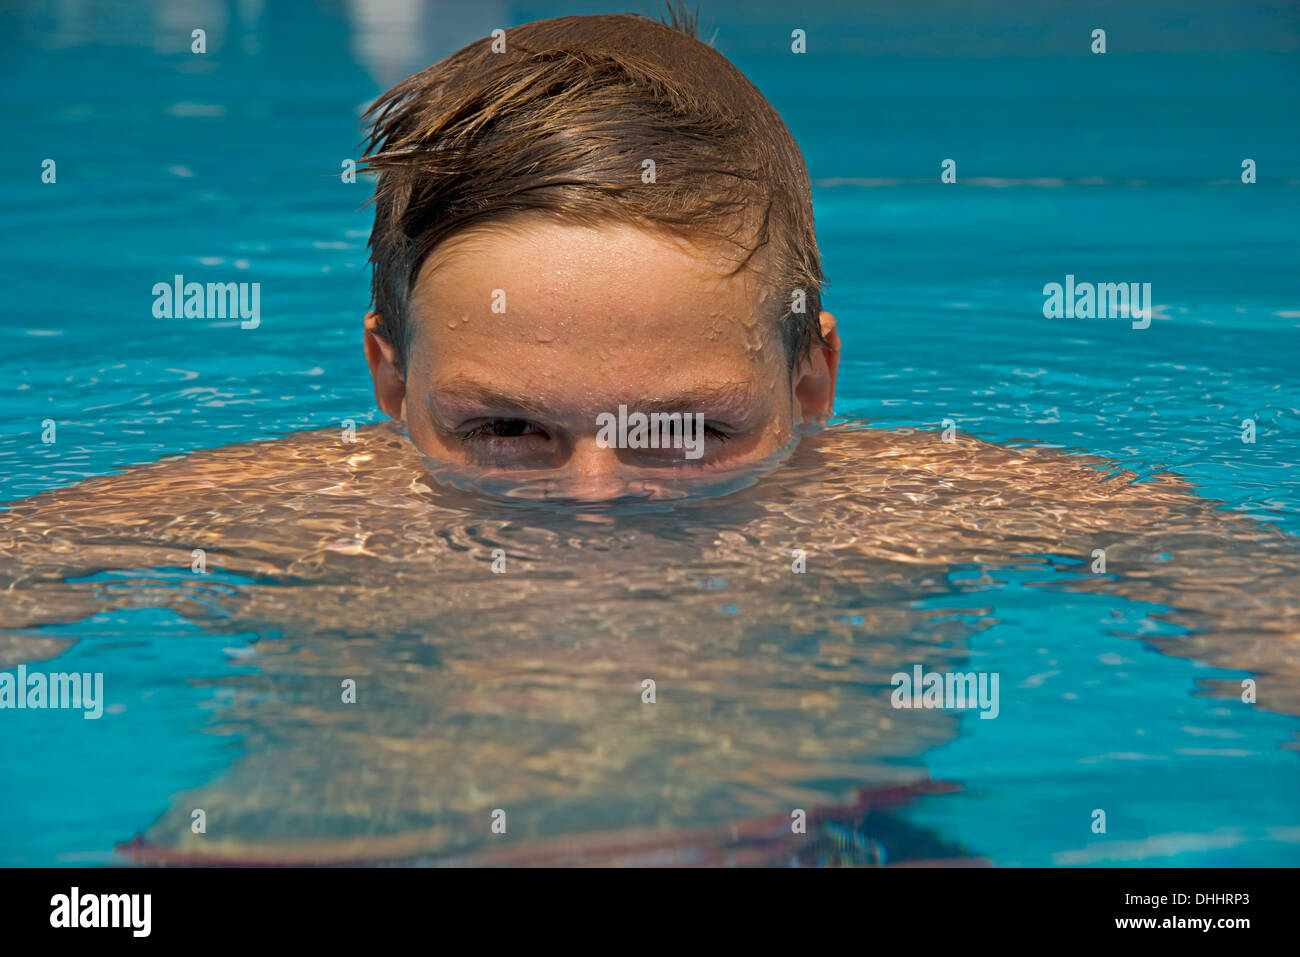 Young emerges from the water in a swimming pool Stock Photo